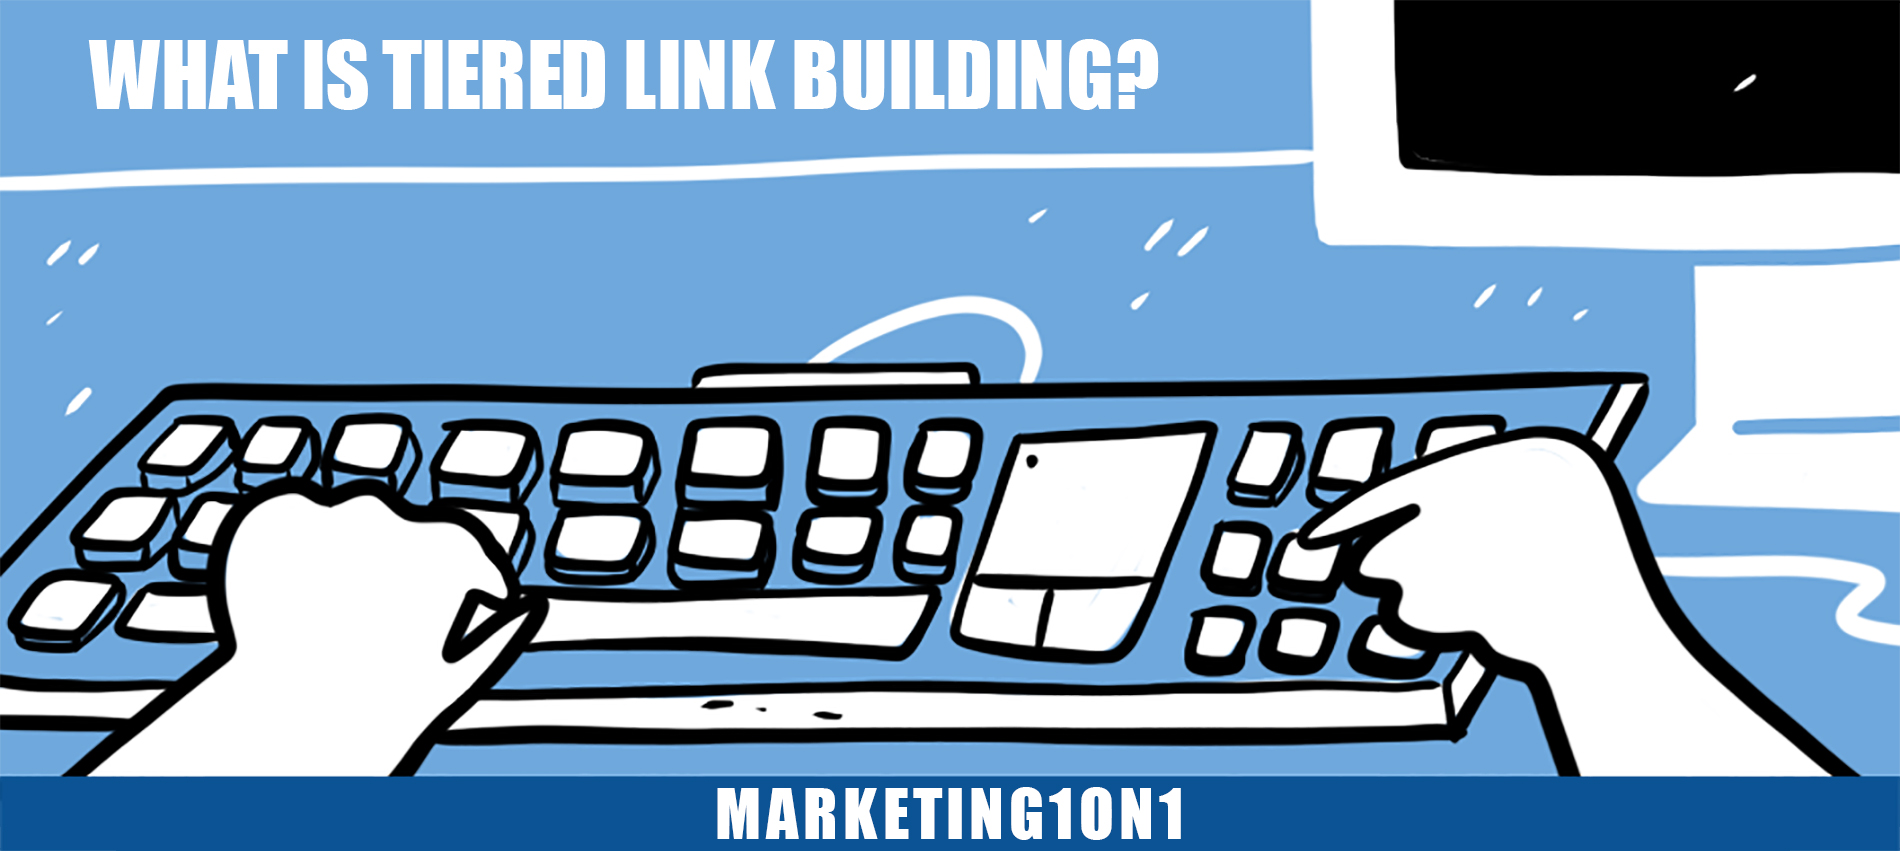 What is tiered link building?